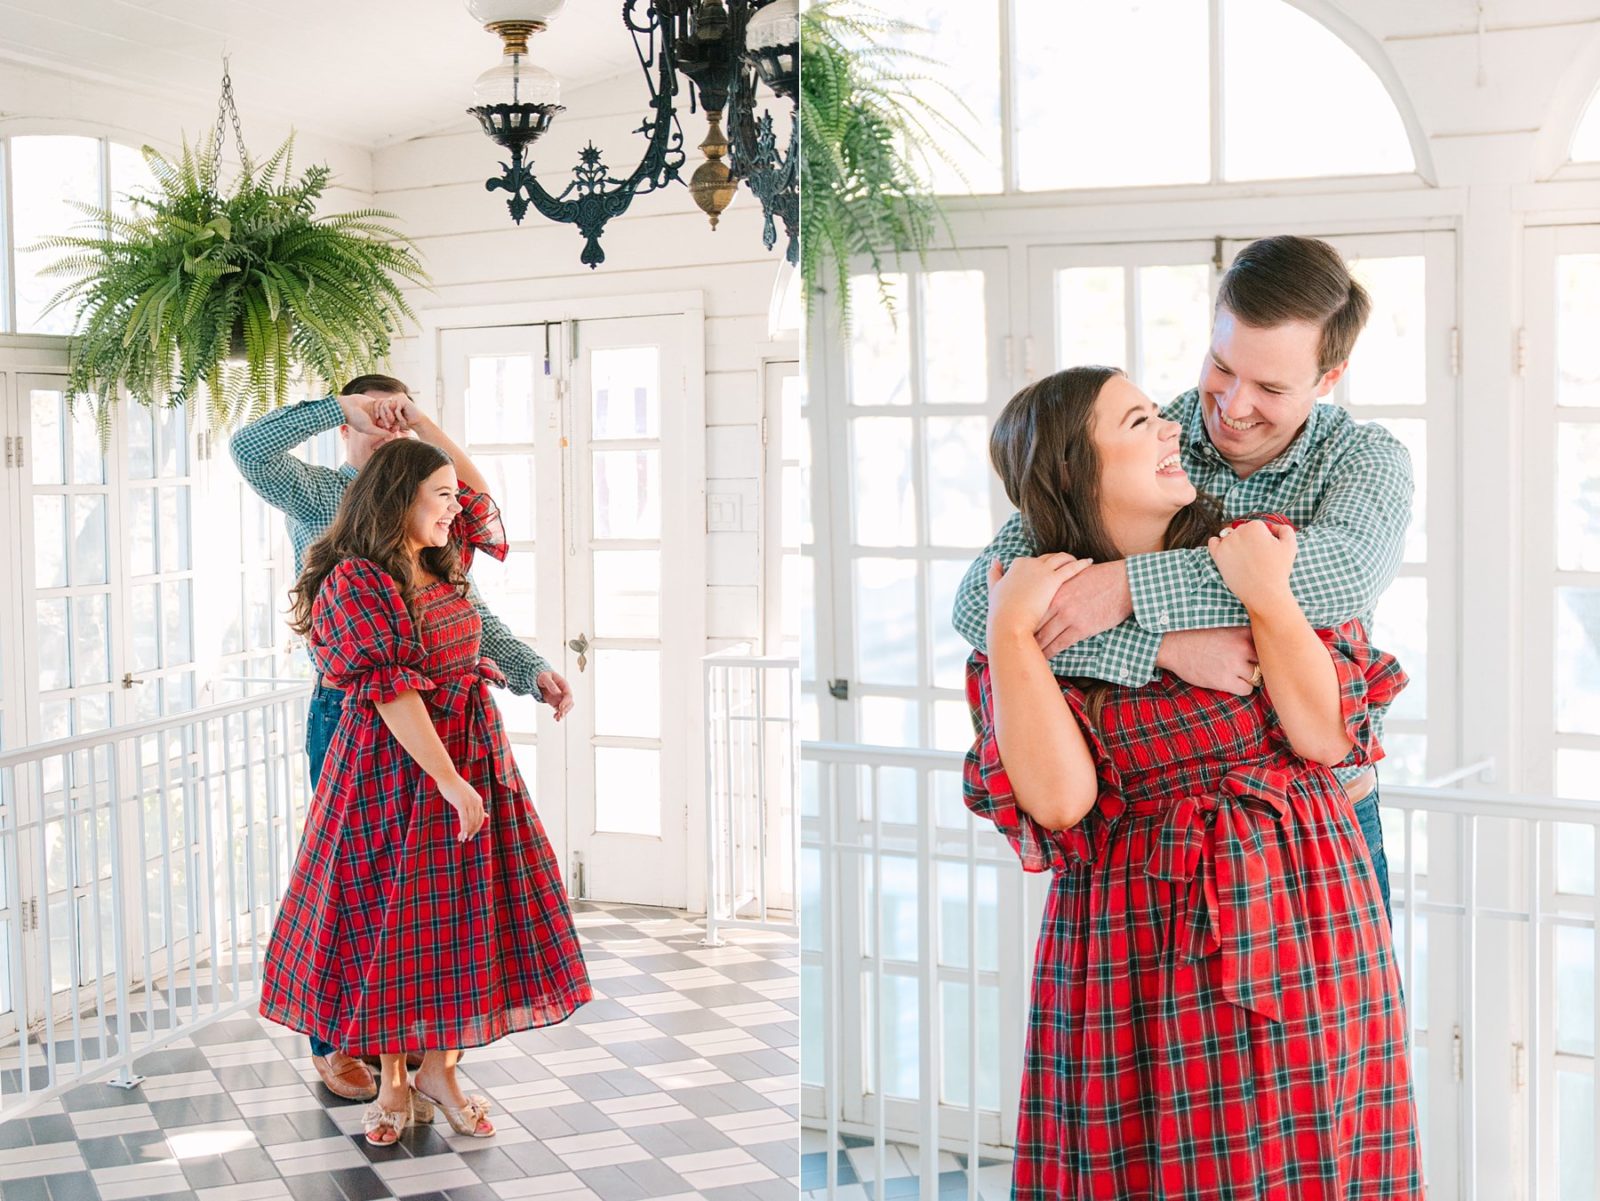 christmas inspired engagement session, checkered room at woodbine mansion, dancing in checkered room, garden room woodbine mansion,christmas photo at woodbine mansion, round rock christmas photos, engagement photo locations in round rock, woodbine mansion, round rock wedding venue, tara lyons photography